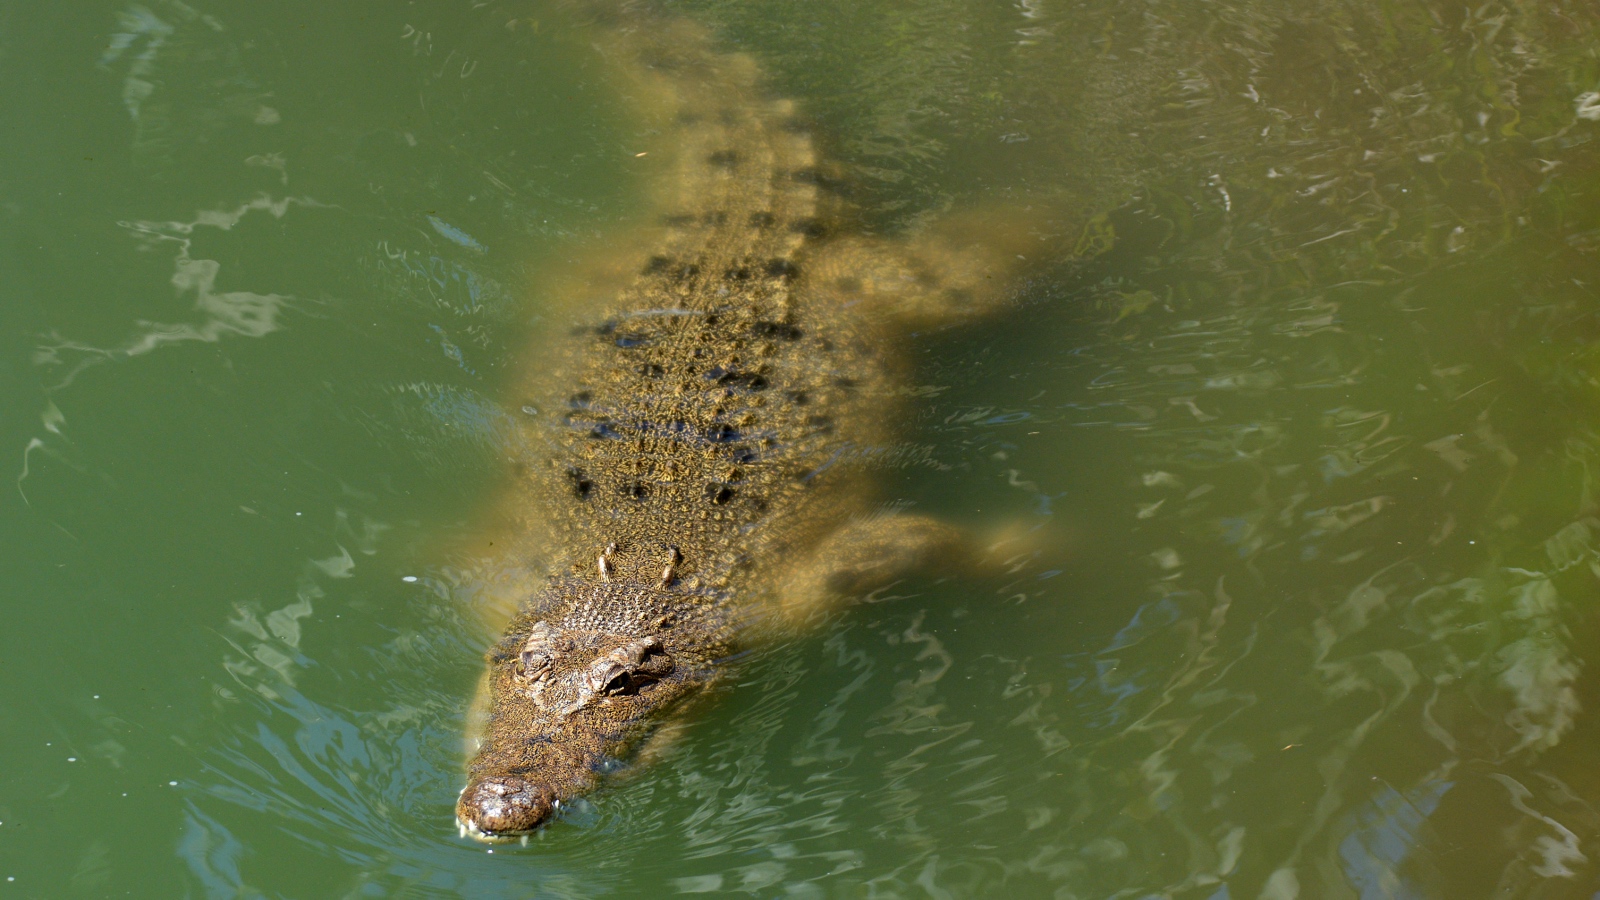 saltwater crocodile floating in the water